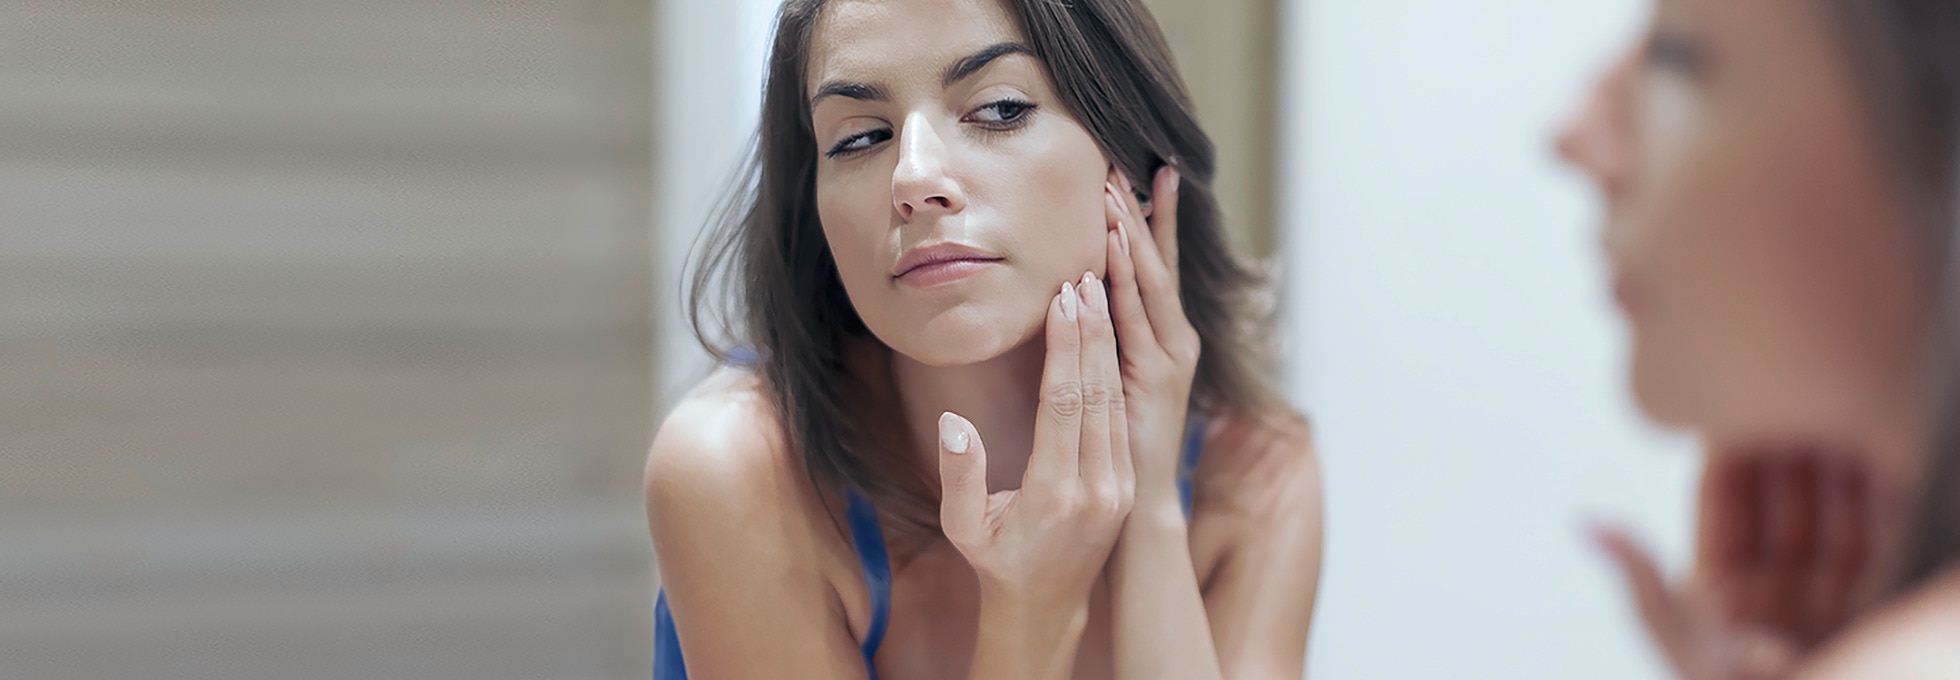 34 Ideas on How to Remove Acne Scars and Help Skin Heal